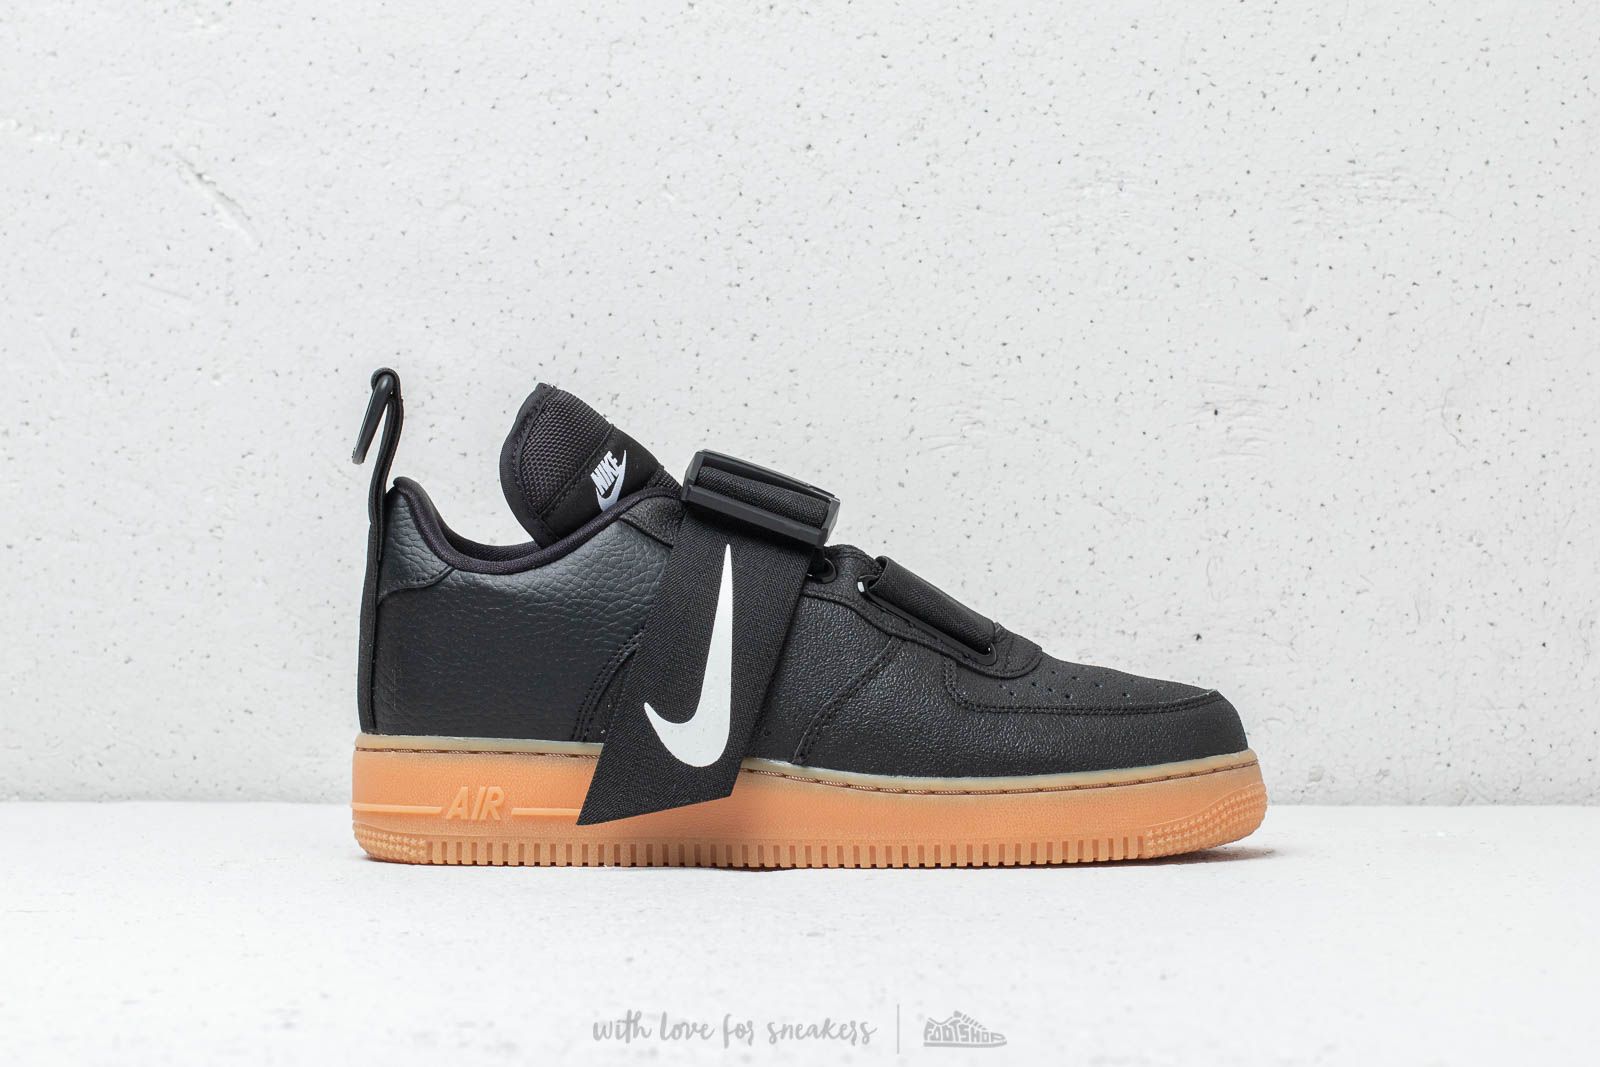 Nike Air Force 1 Utility is available 